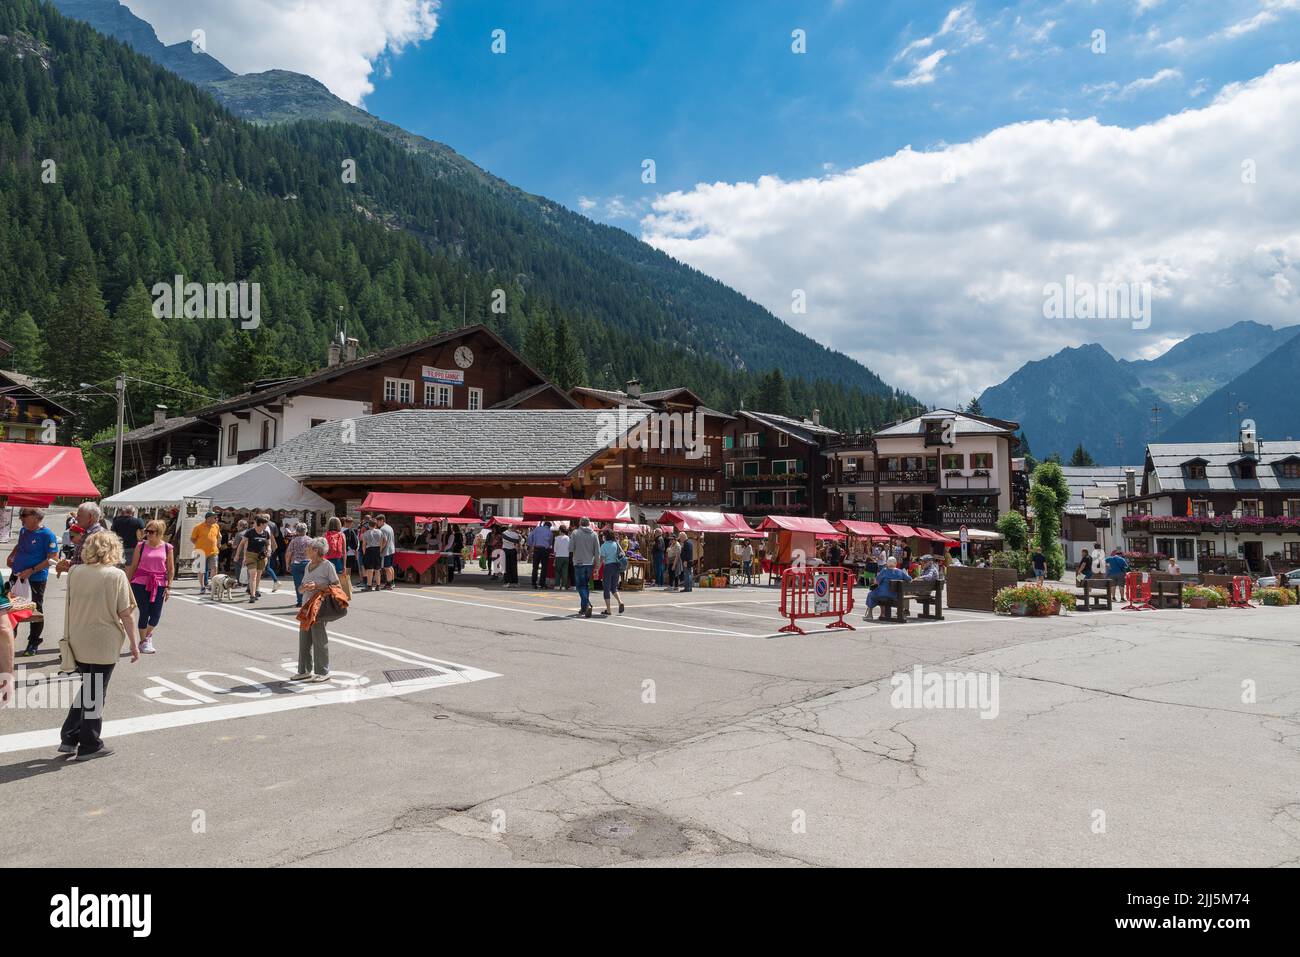 Mountain culture and tradition. San Bernardo fair, an important summer festival with stalls and alpine handicraft products. Main square of Macugnaga Stock Photo